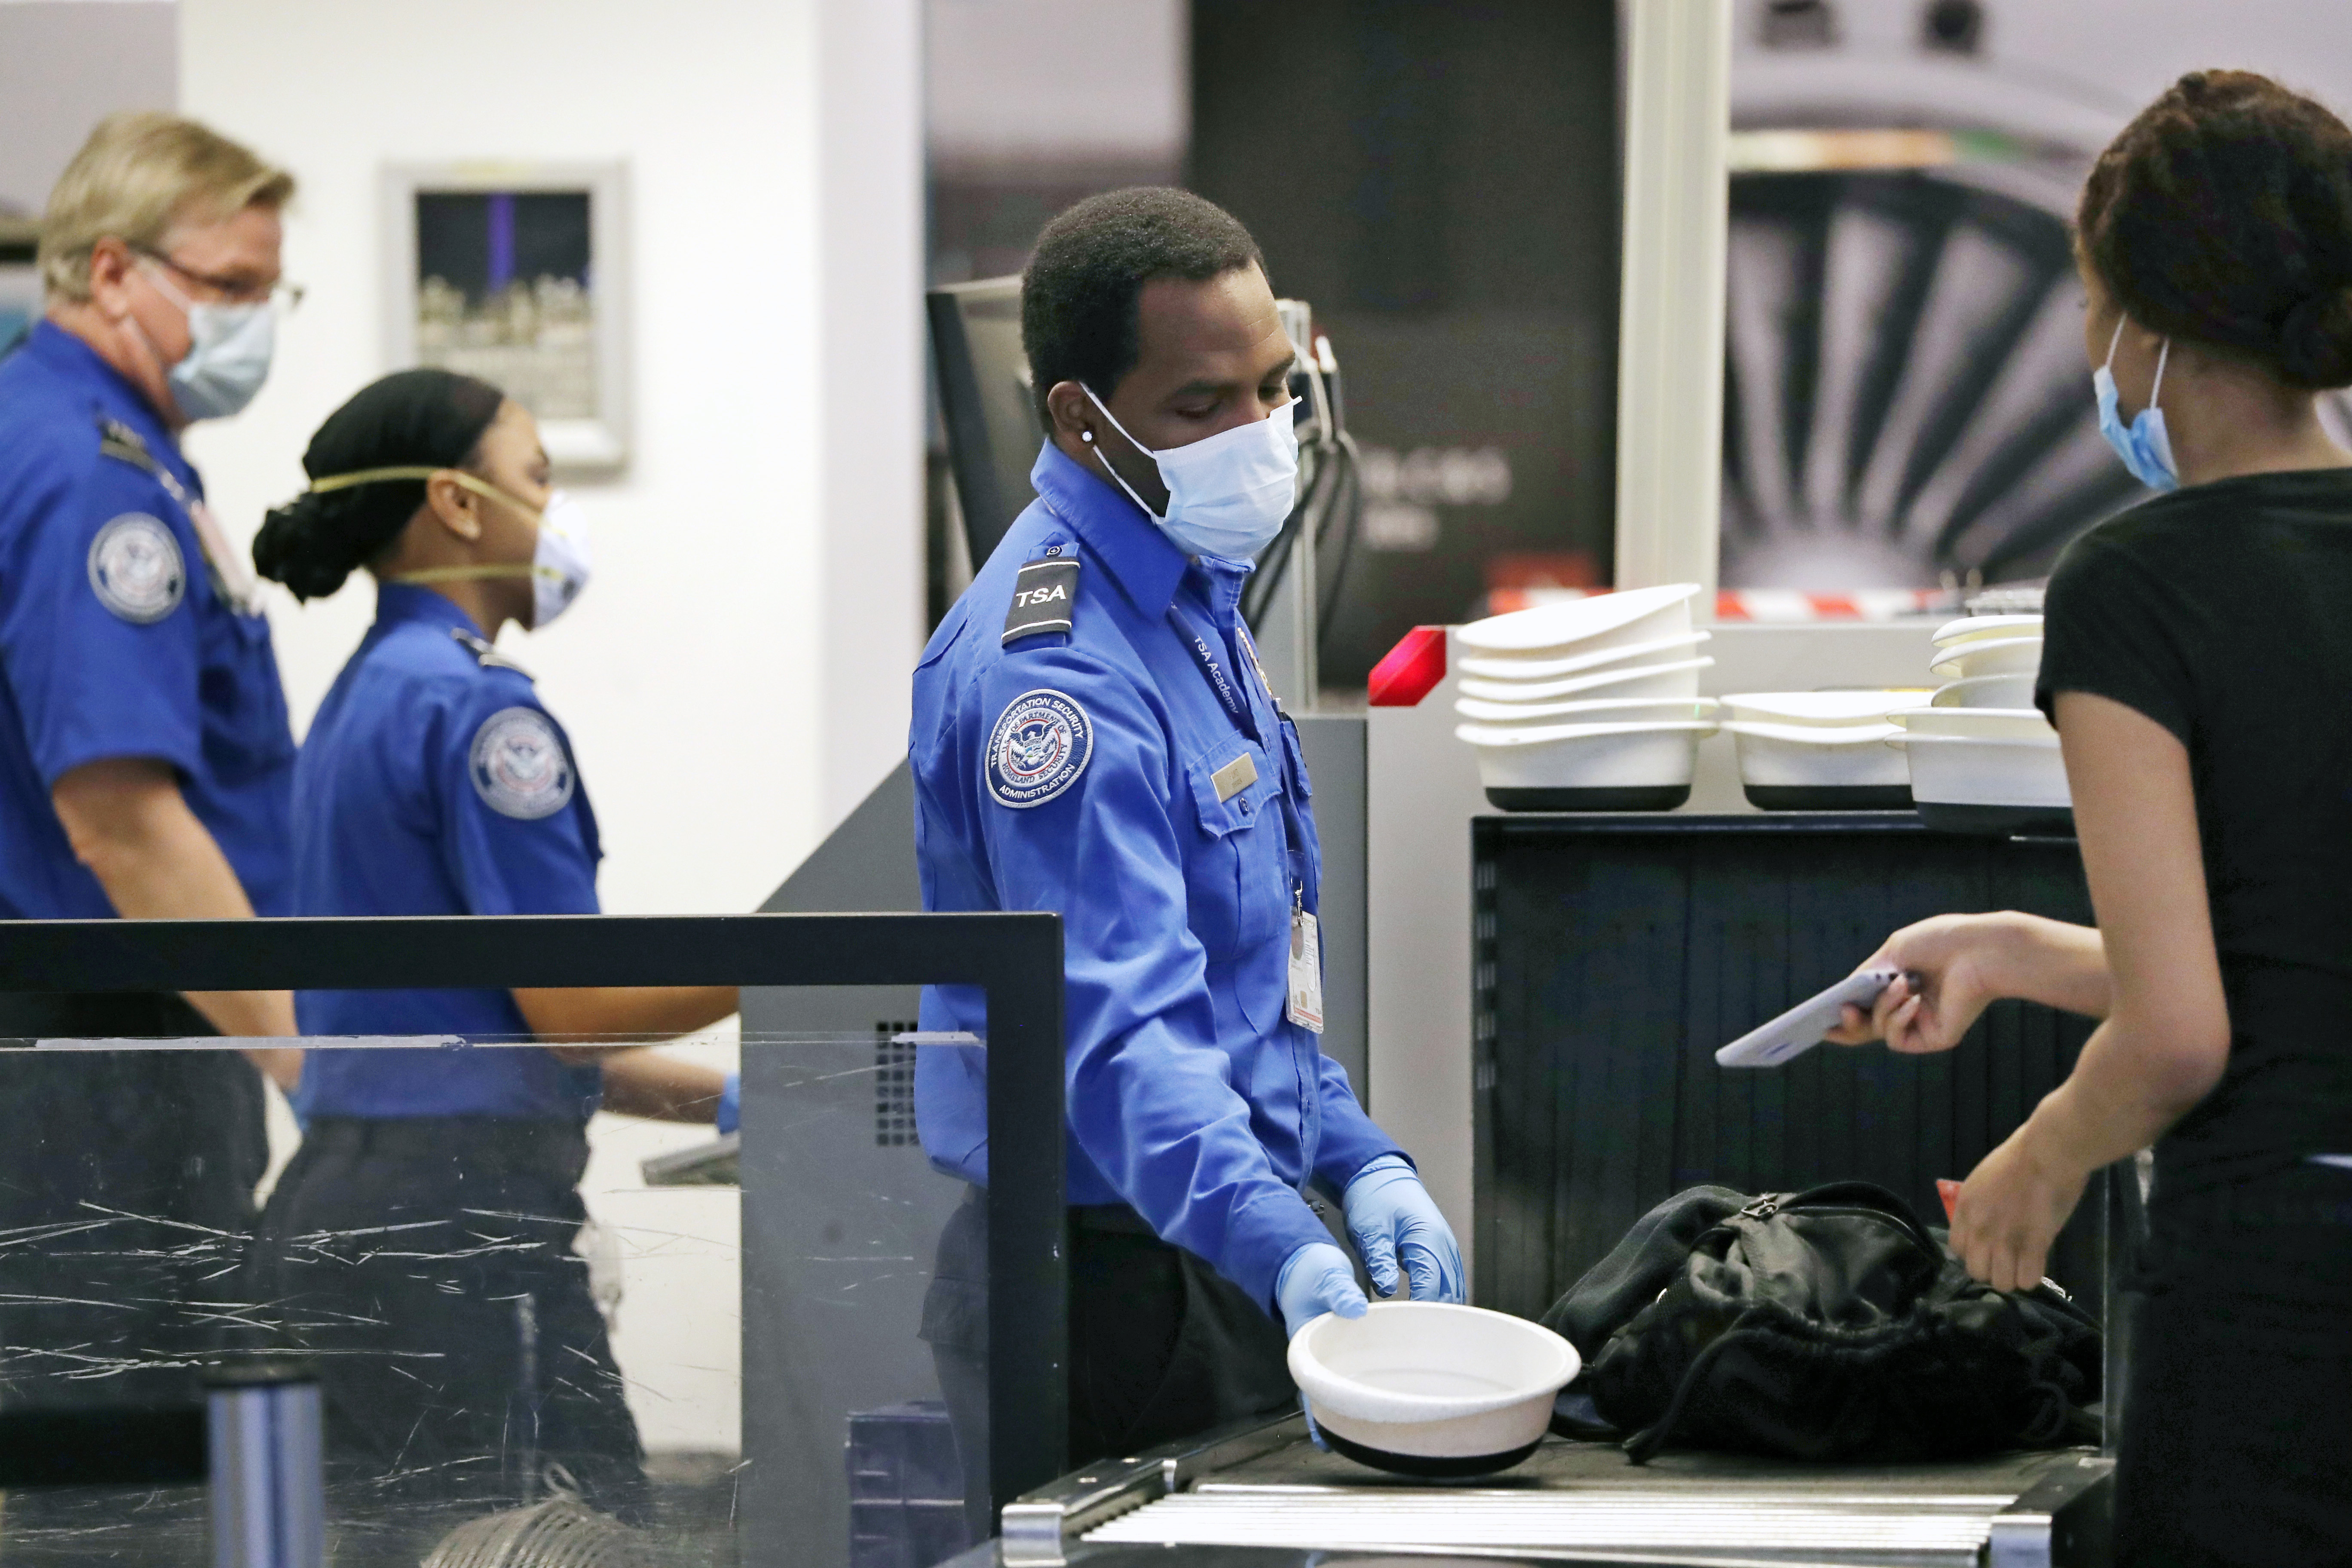 TSA criticized for tweeting picture of a passenger's luggage